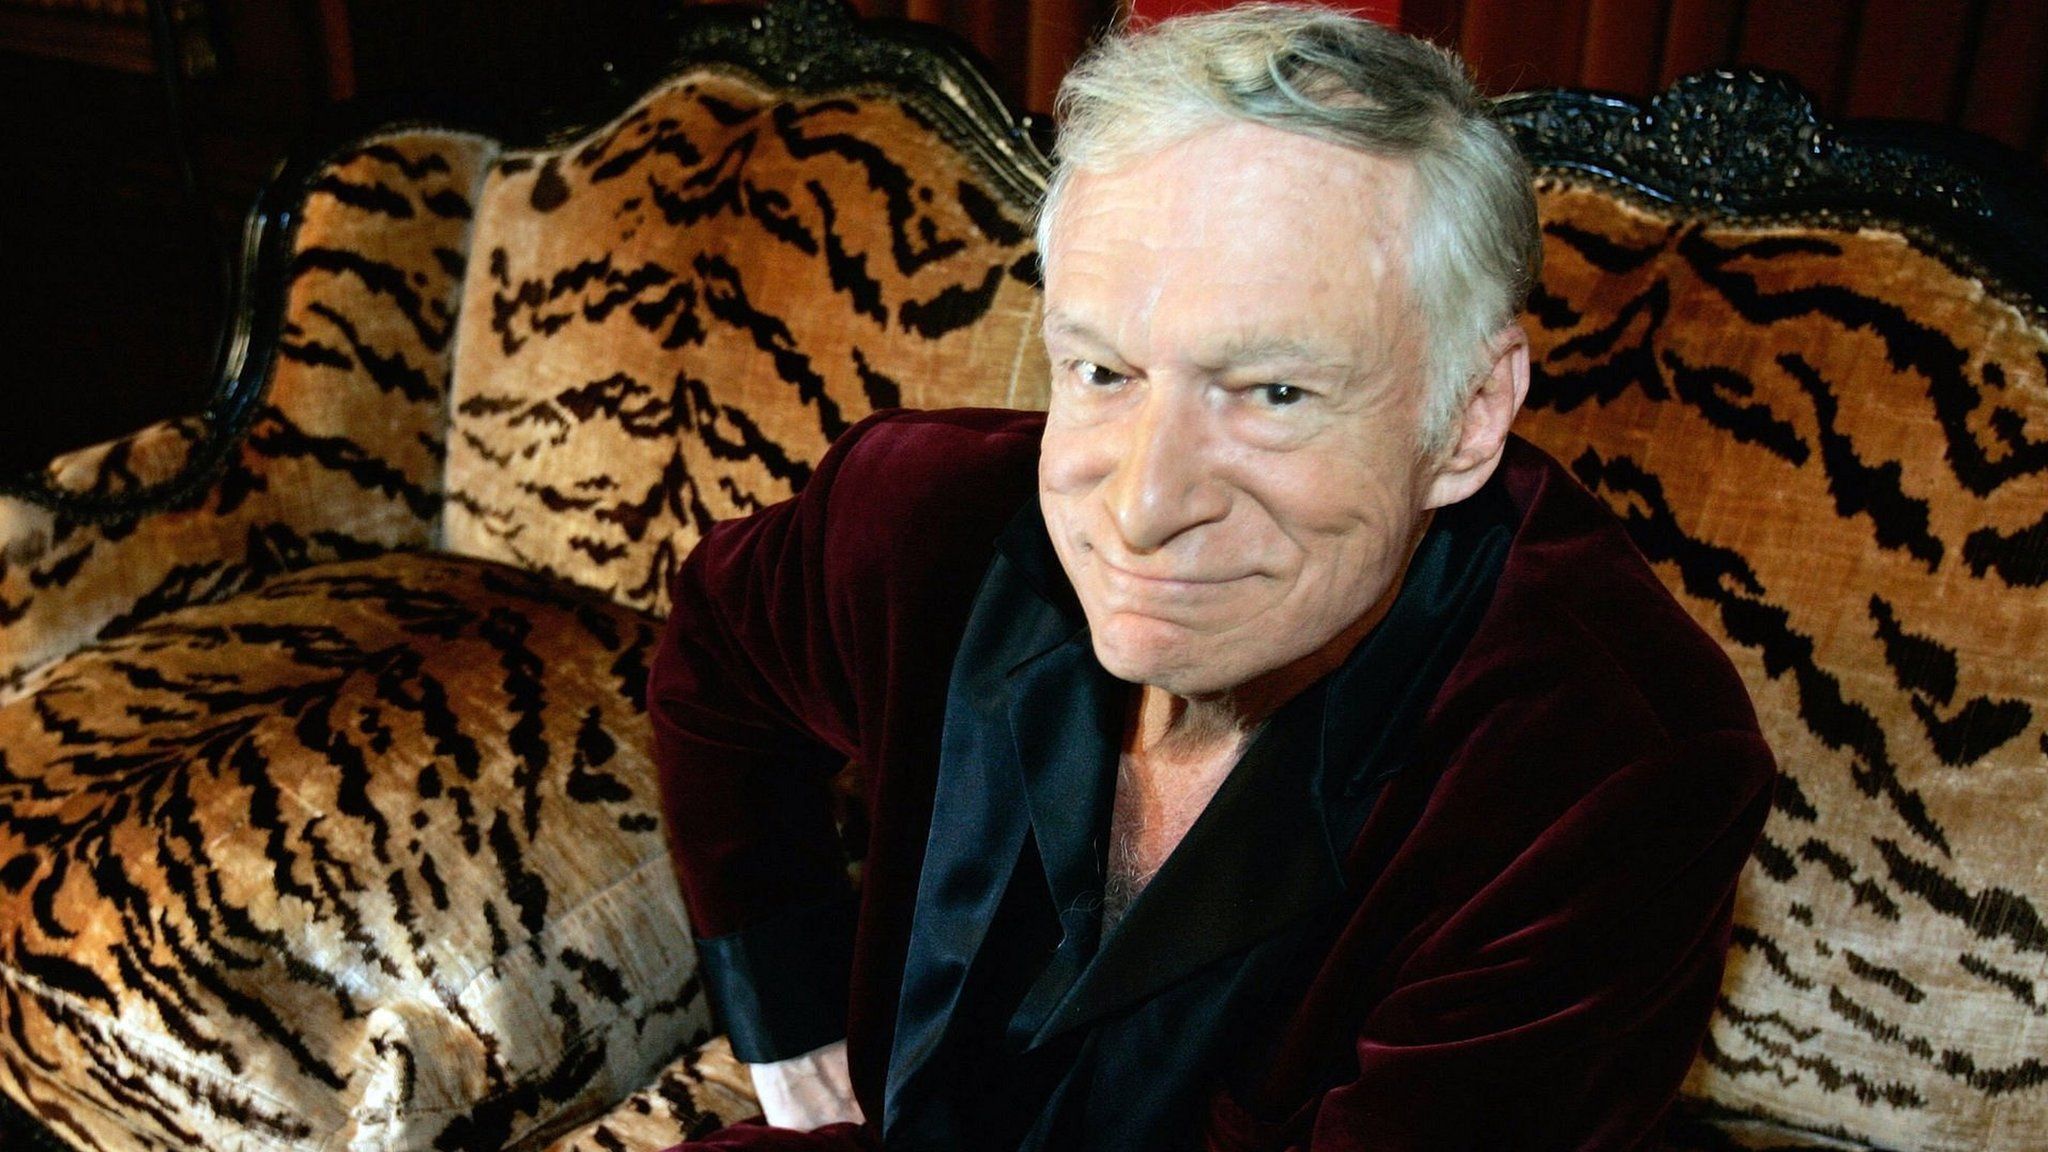 This file photo taken on August 23, 2006 shows Hugh Hefner, CEO of Playboy Enterprises, posing for a photo during an interview with journalists at his mansion in Los Angeles, California